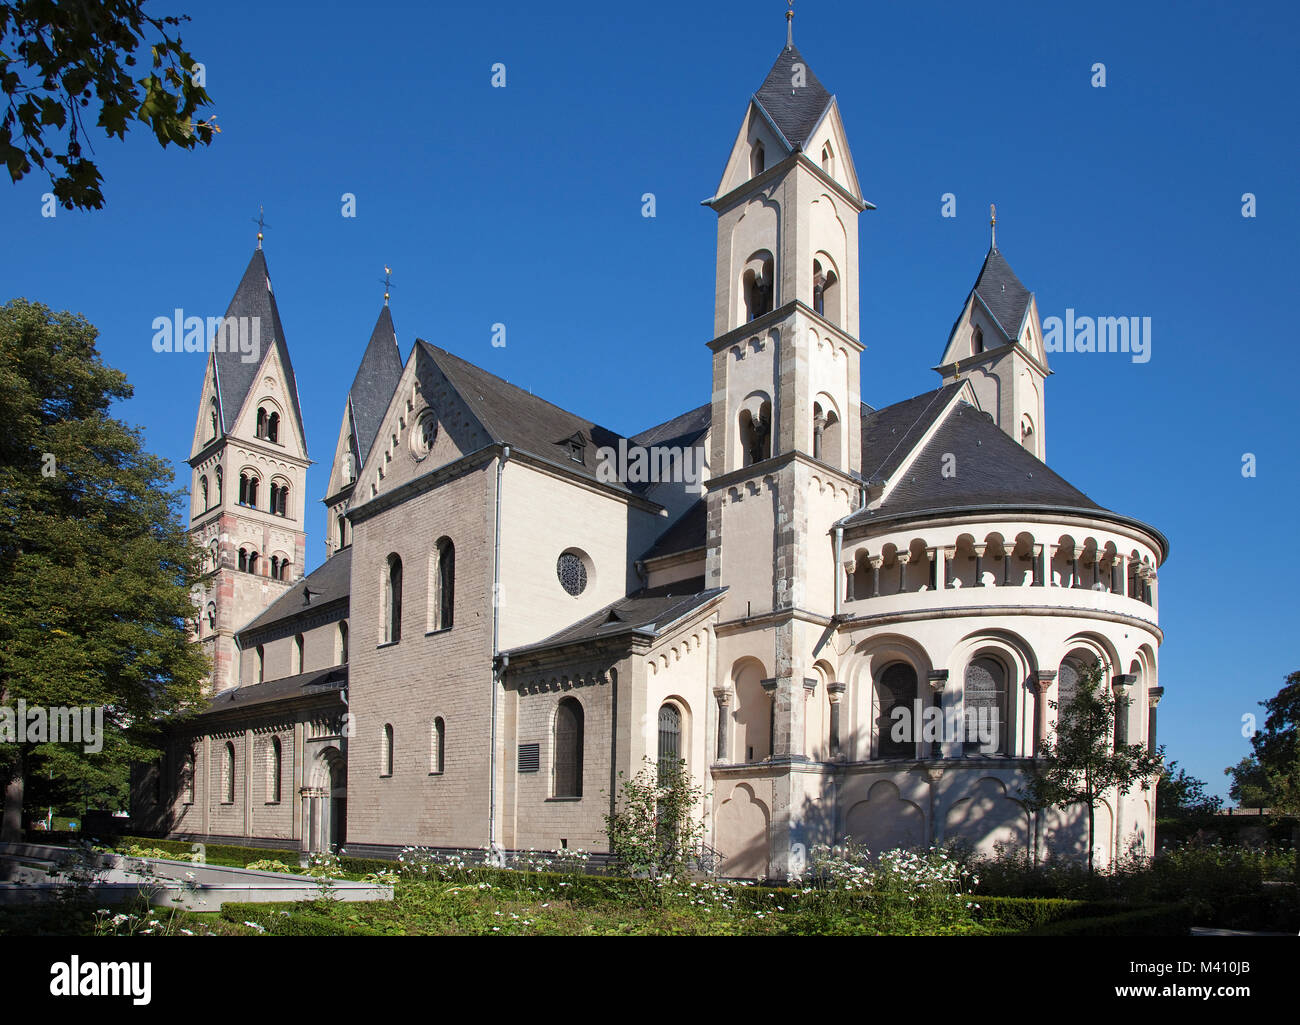 Basilica of St. Castor at old town, oldest church of Coblenz, UNESCO World Heritage cultural site, Rhineland-Palatinate, Germany, Europe Stock Photo